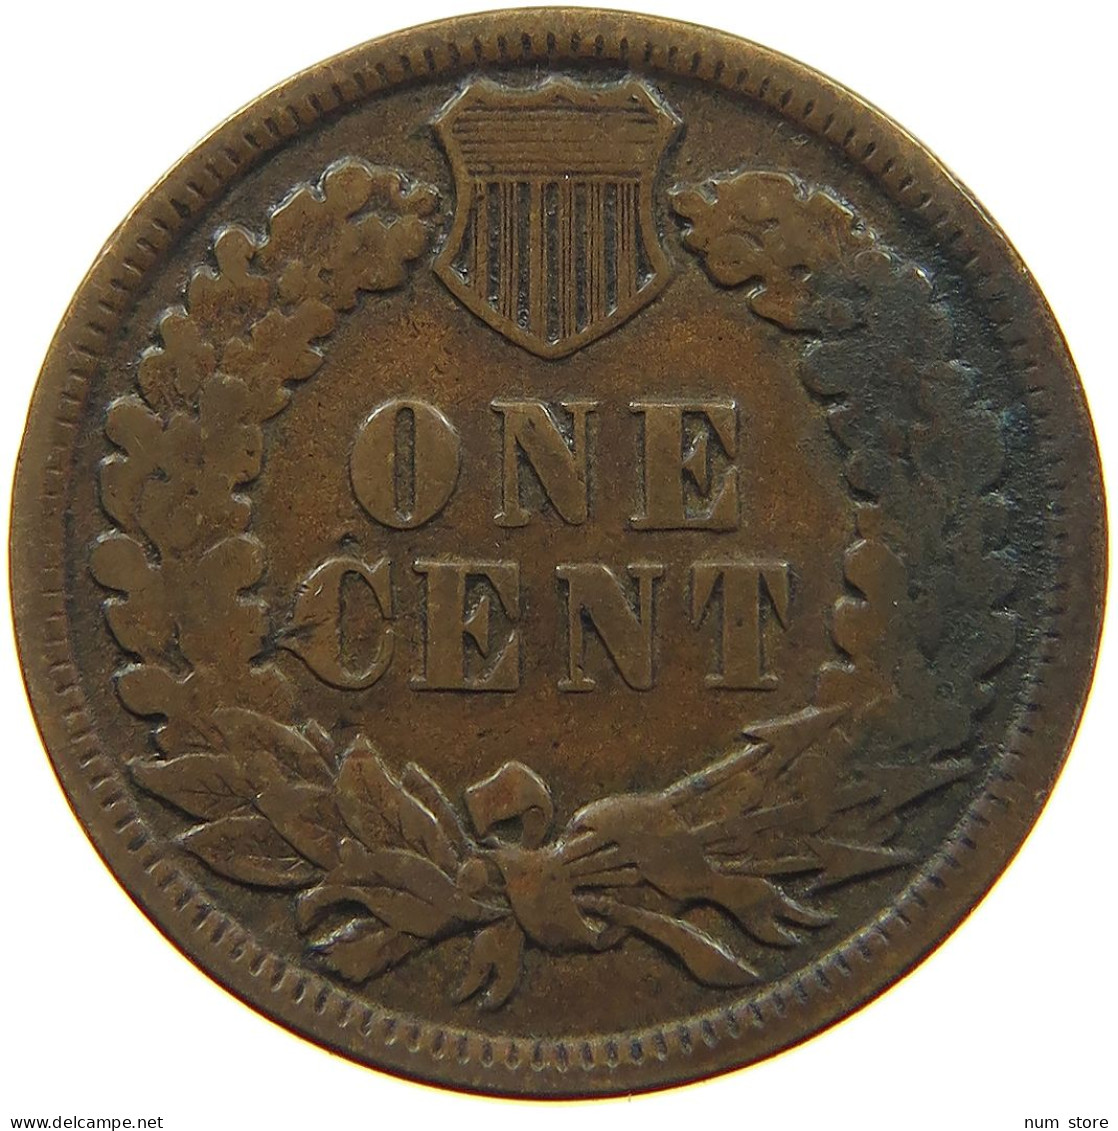 UNITED STATES OF AMERICA CENT 1892 INDIAN HEAD #c006 0137 - 1859-1909: Indian Head